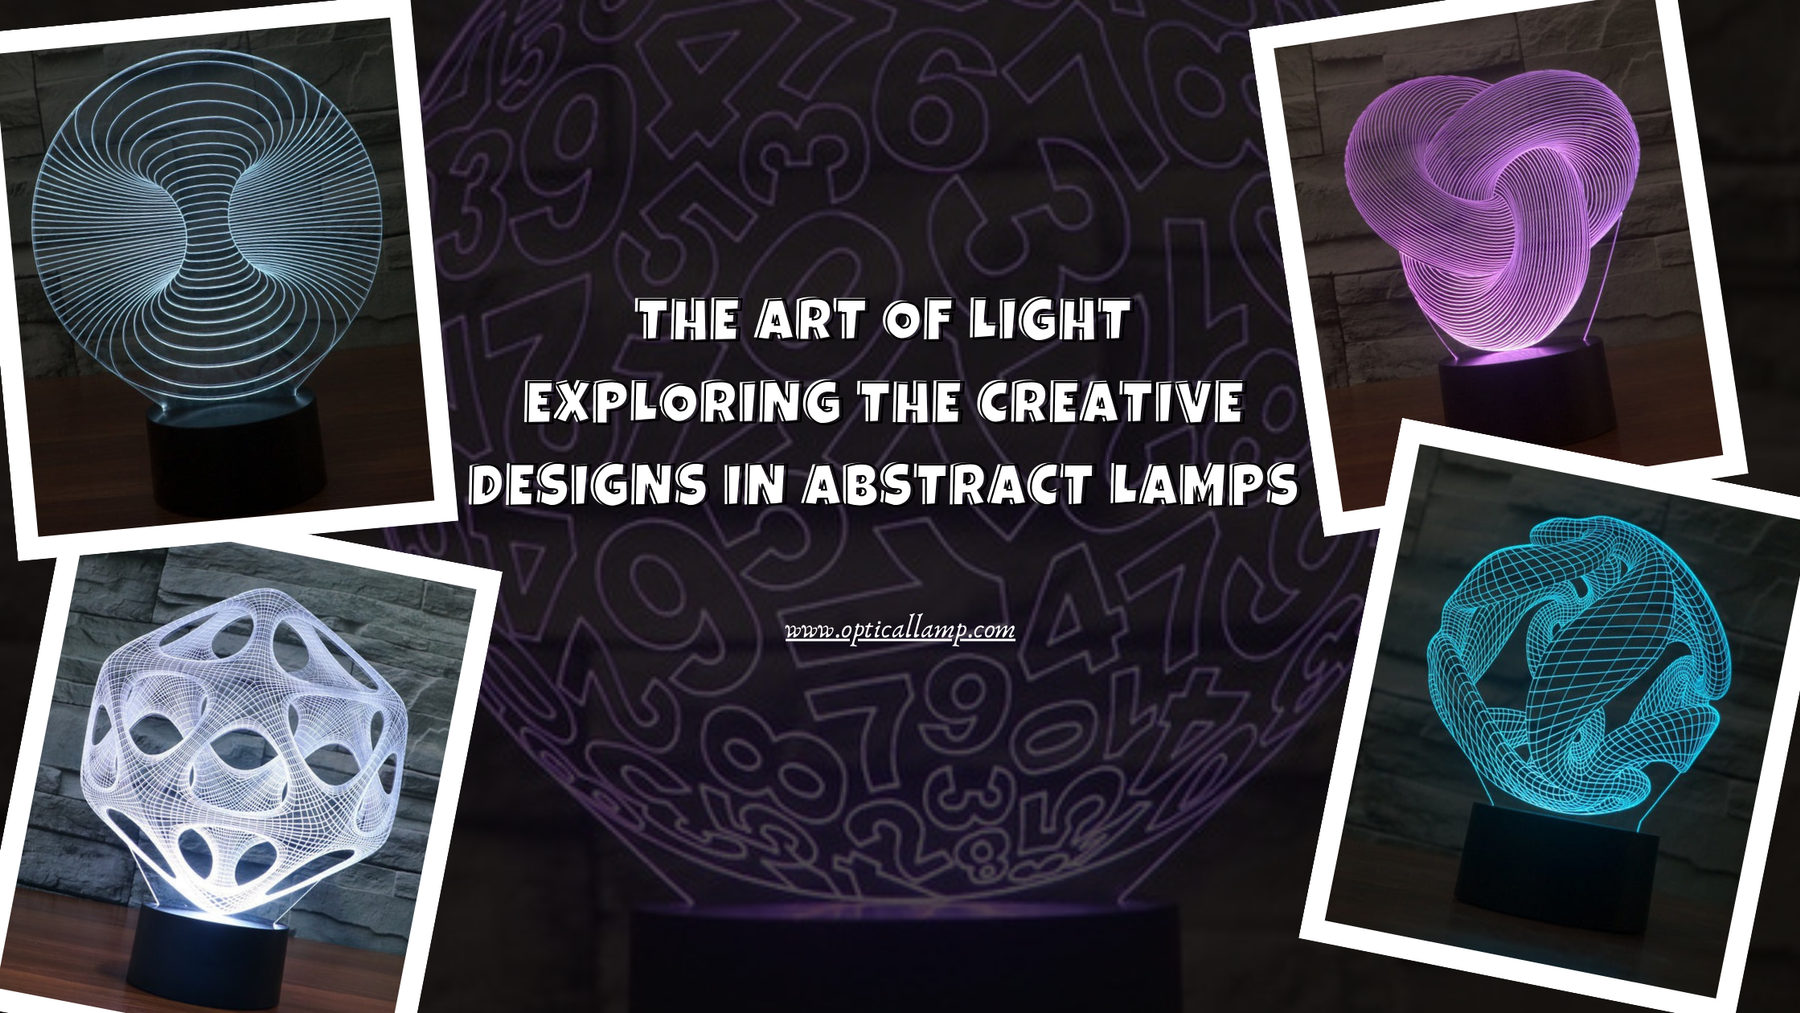 The Art of Light: Exploring the Creative Designs in Abstract Lamps